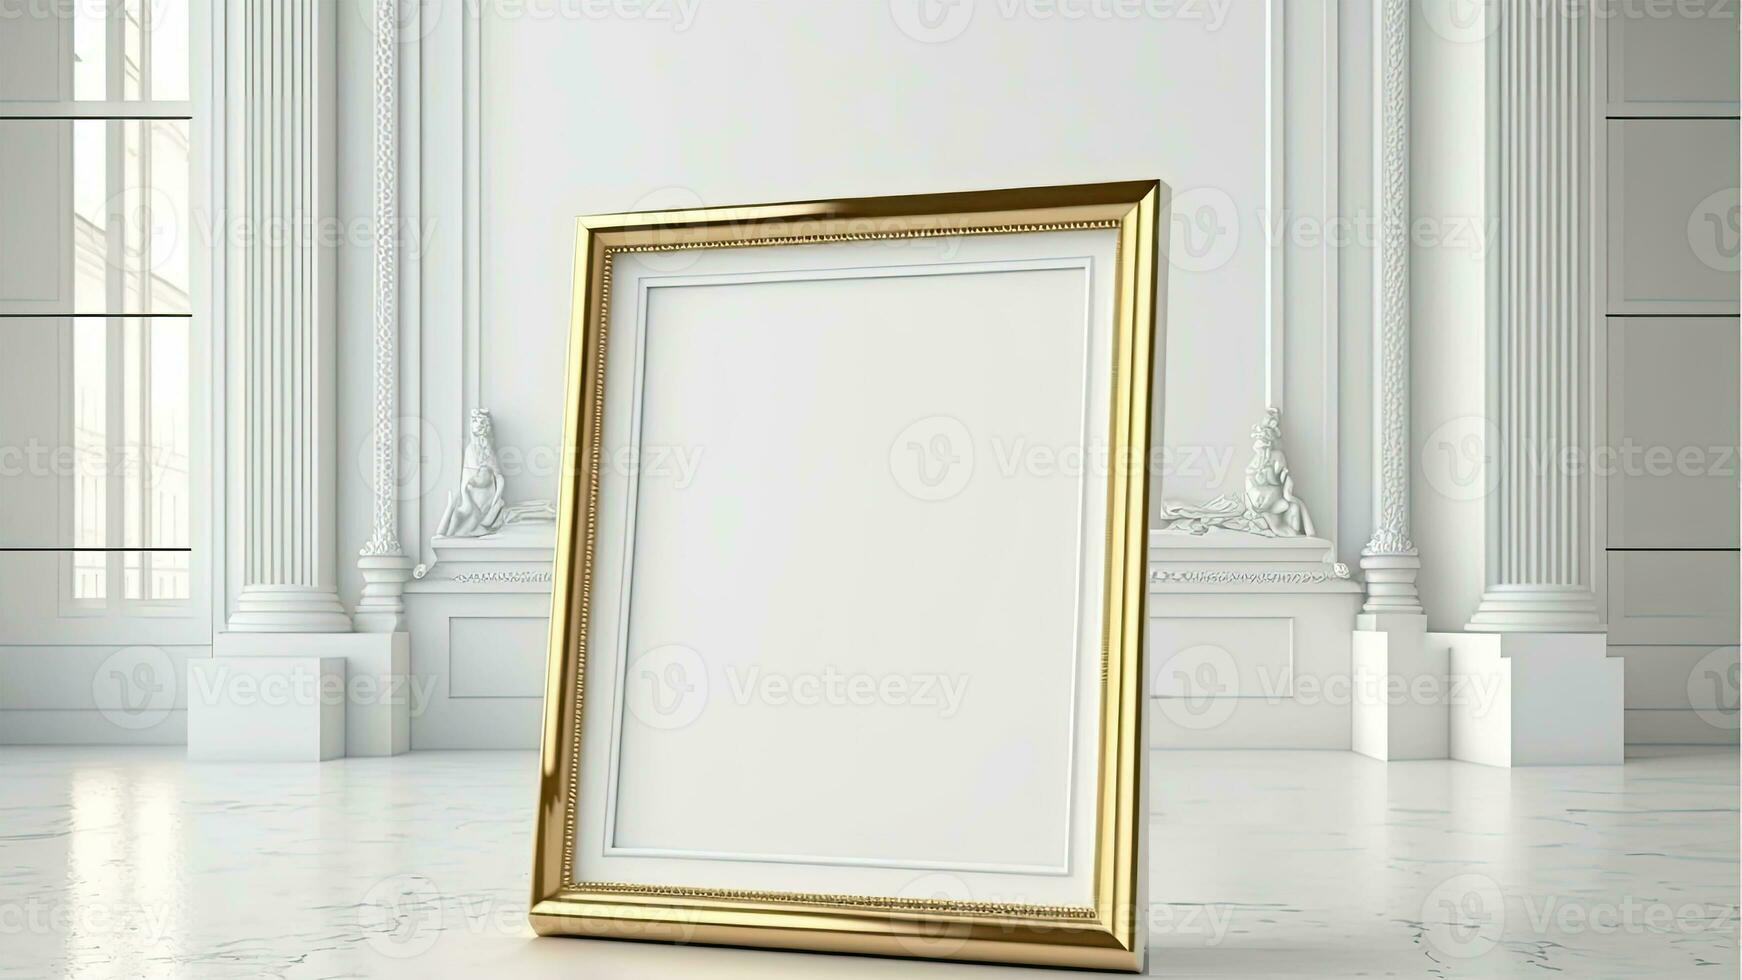 3D Render of Blank Golden Photo Frame Mockup On Floor And Classic Interior Wall.